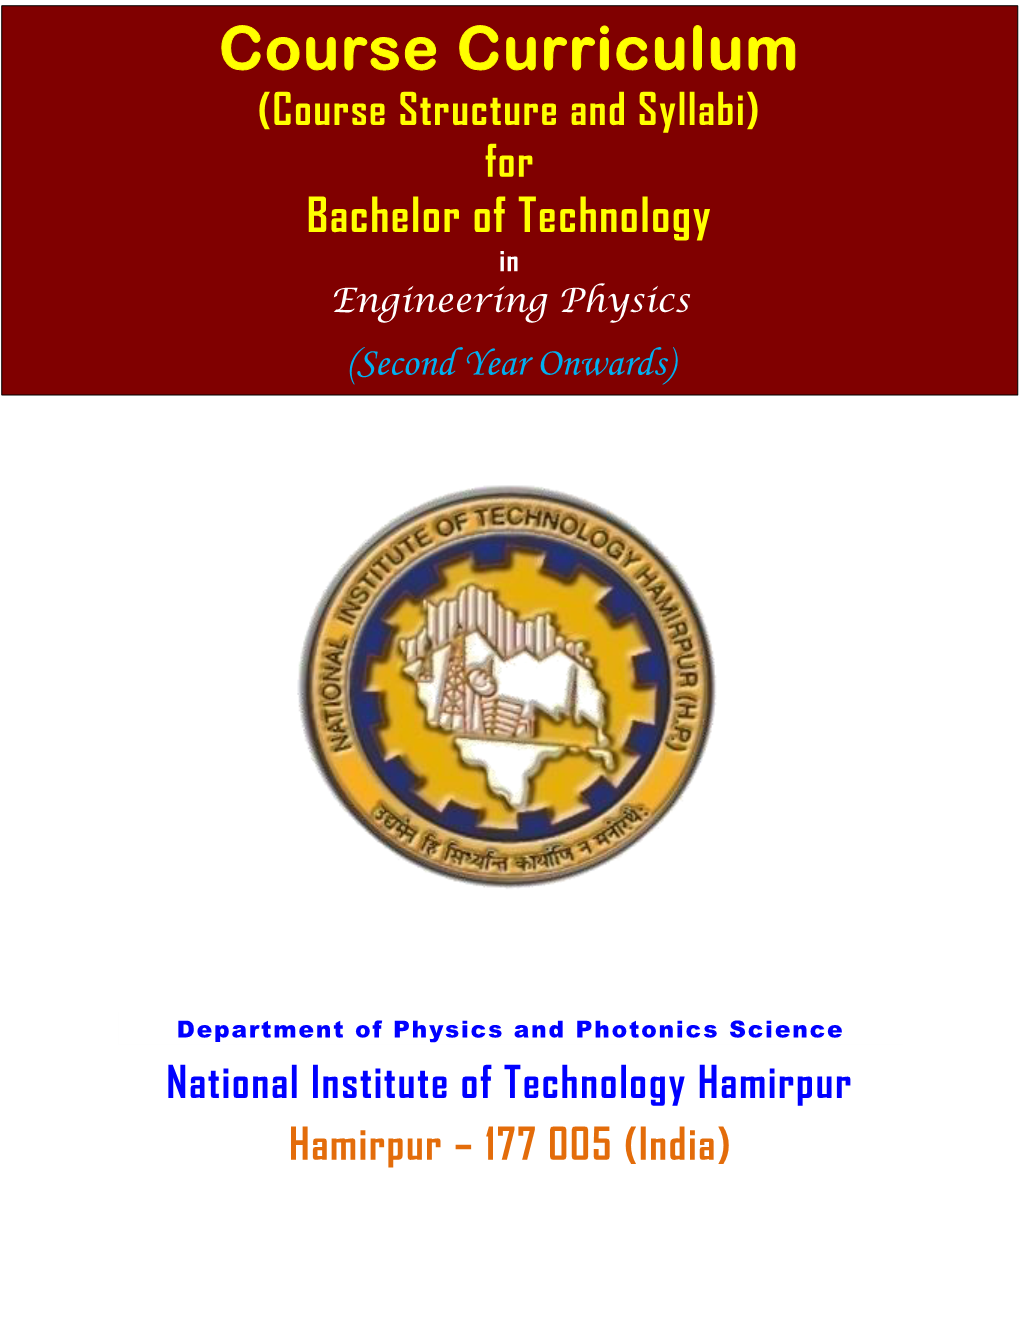 Course Curriculum (Course Structure and Syllabi) for Bachelor of Technology in Engineering Physics